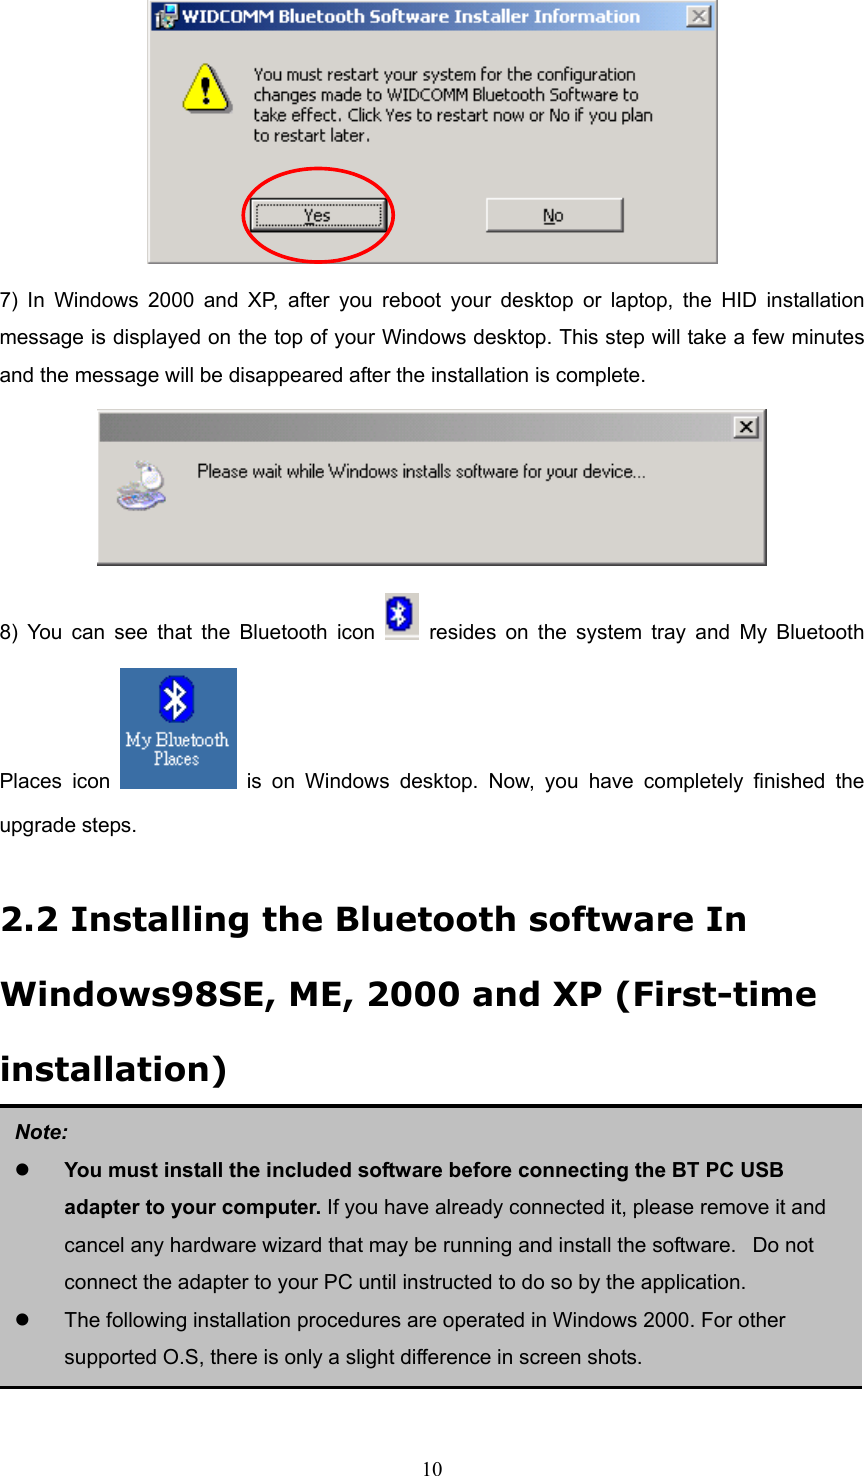  10  7) In Windows 2000 and XP, after you reboot your desktop or laptop, the HID installation message is displayed on the top of your Windows desktop. This step will take a few minutes and the message will be disappeared after the installation is complete.    8) You can see that the Bluetooth icon   resides on the system tray and My Bluetooth Places icon   is on Windows desktop. Now, you have completely finished the upgrade steps.  2.2 Installing the Bluetooth software In Windows98SE, ME, 2000 and XP (First-time installation)         Note:   You must install the included software before connecting the BT PC USB adapter to your computer. If you have already connected it, please remove it and cancel any hardware wizard that may be running and install the software.   Do not connect the adapter to your PC until instructed to do so by the application.   The following installation procedures are operated in Windows 2000. For other supported O.S, there is only a slight difference in screen shots. 